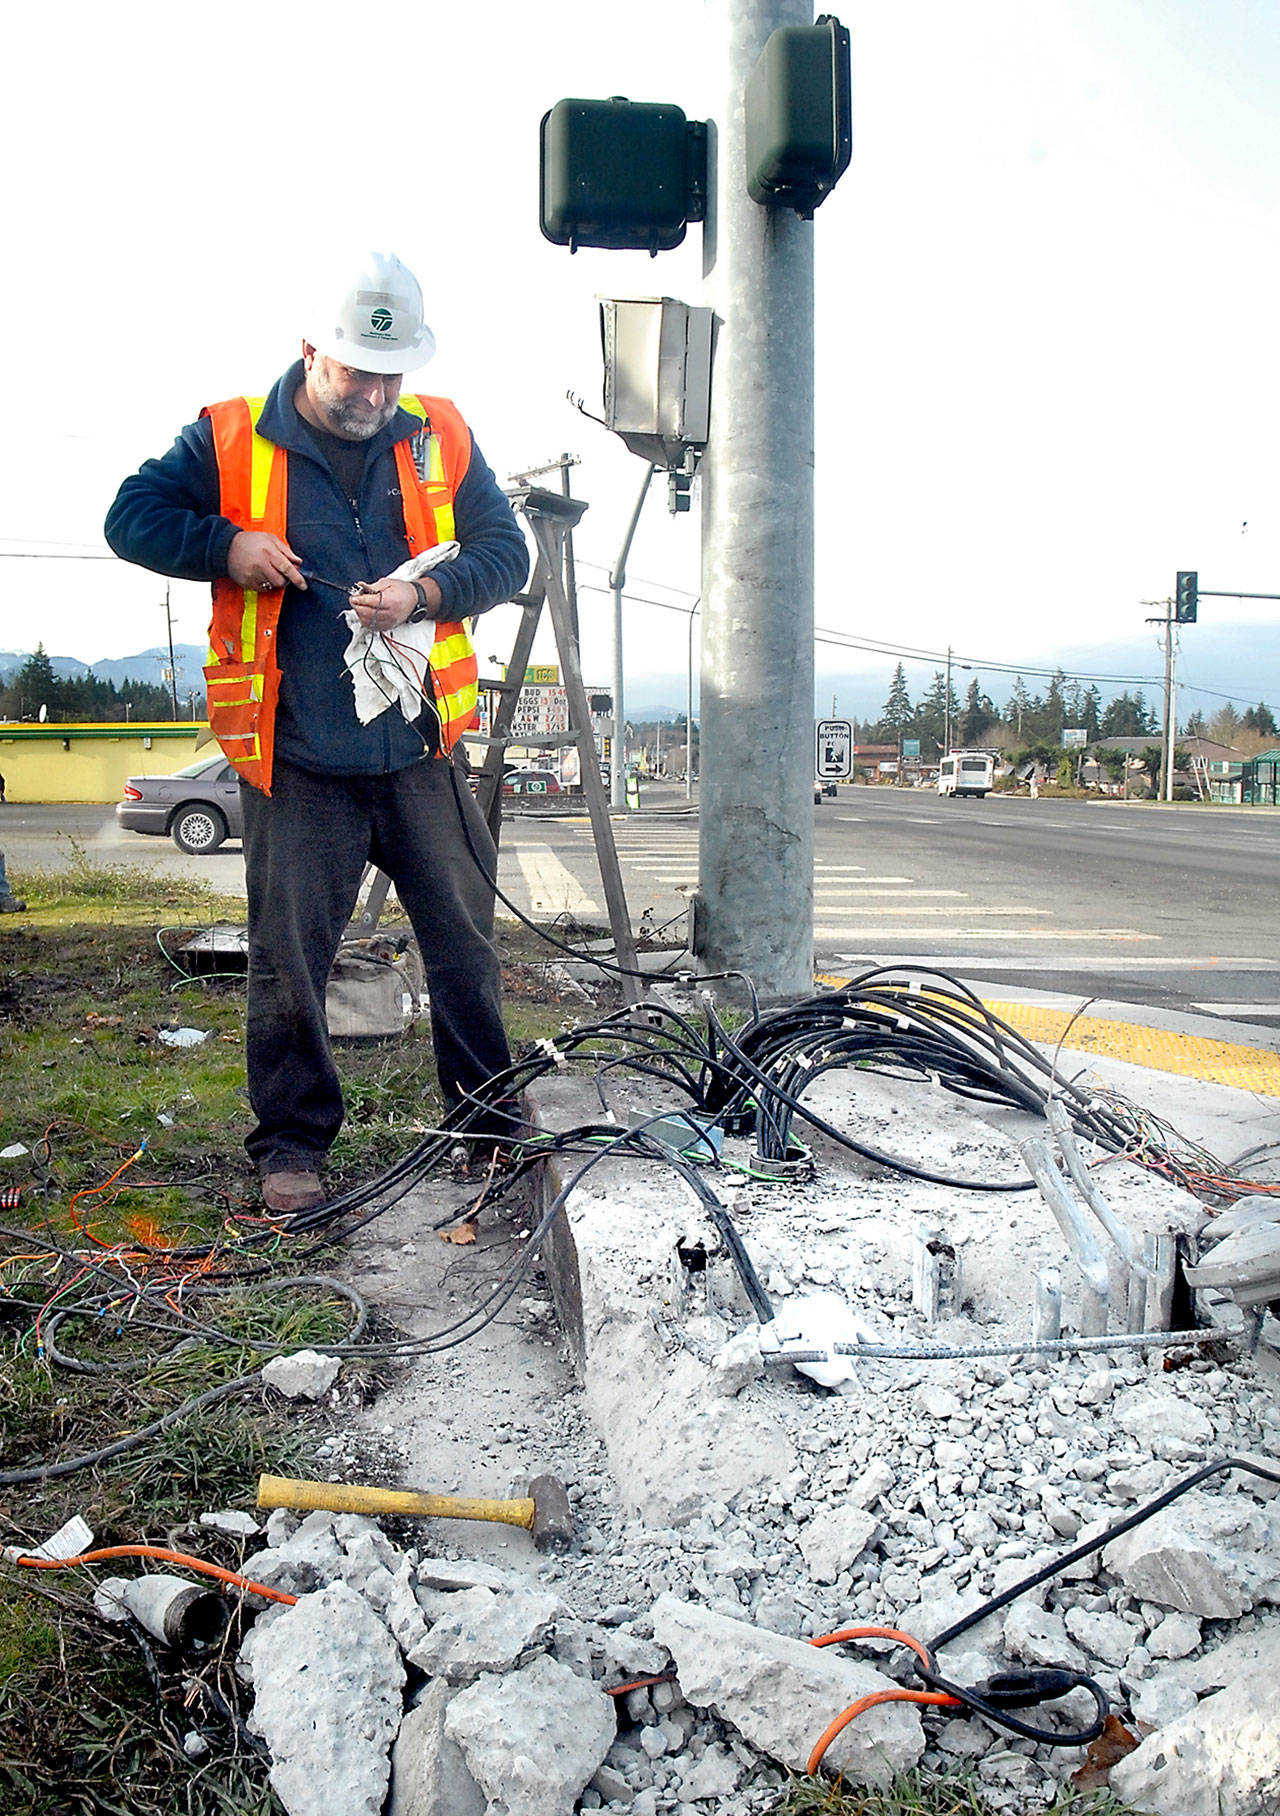 Robb Reese, a transportation technician for the Washington State Department of Transportation, works to repair the wiring to a traffic light control box at the intersection of U.S. Highway 101 at Mount Pleasant Road that was destroyed in a traffic wreck Thursday morning near Port Angeles. (Keith Thorpe/Peninsula Daily News)